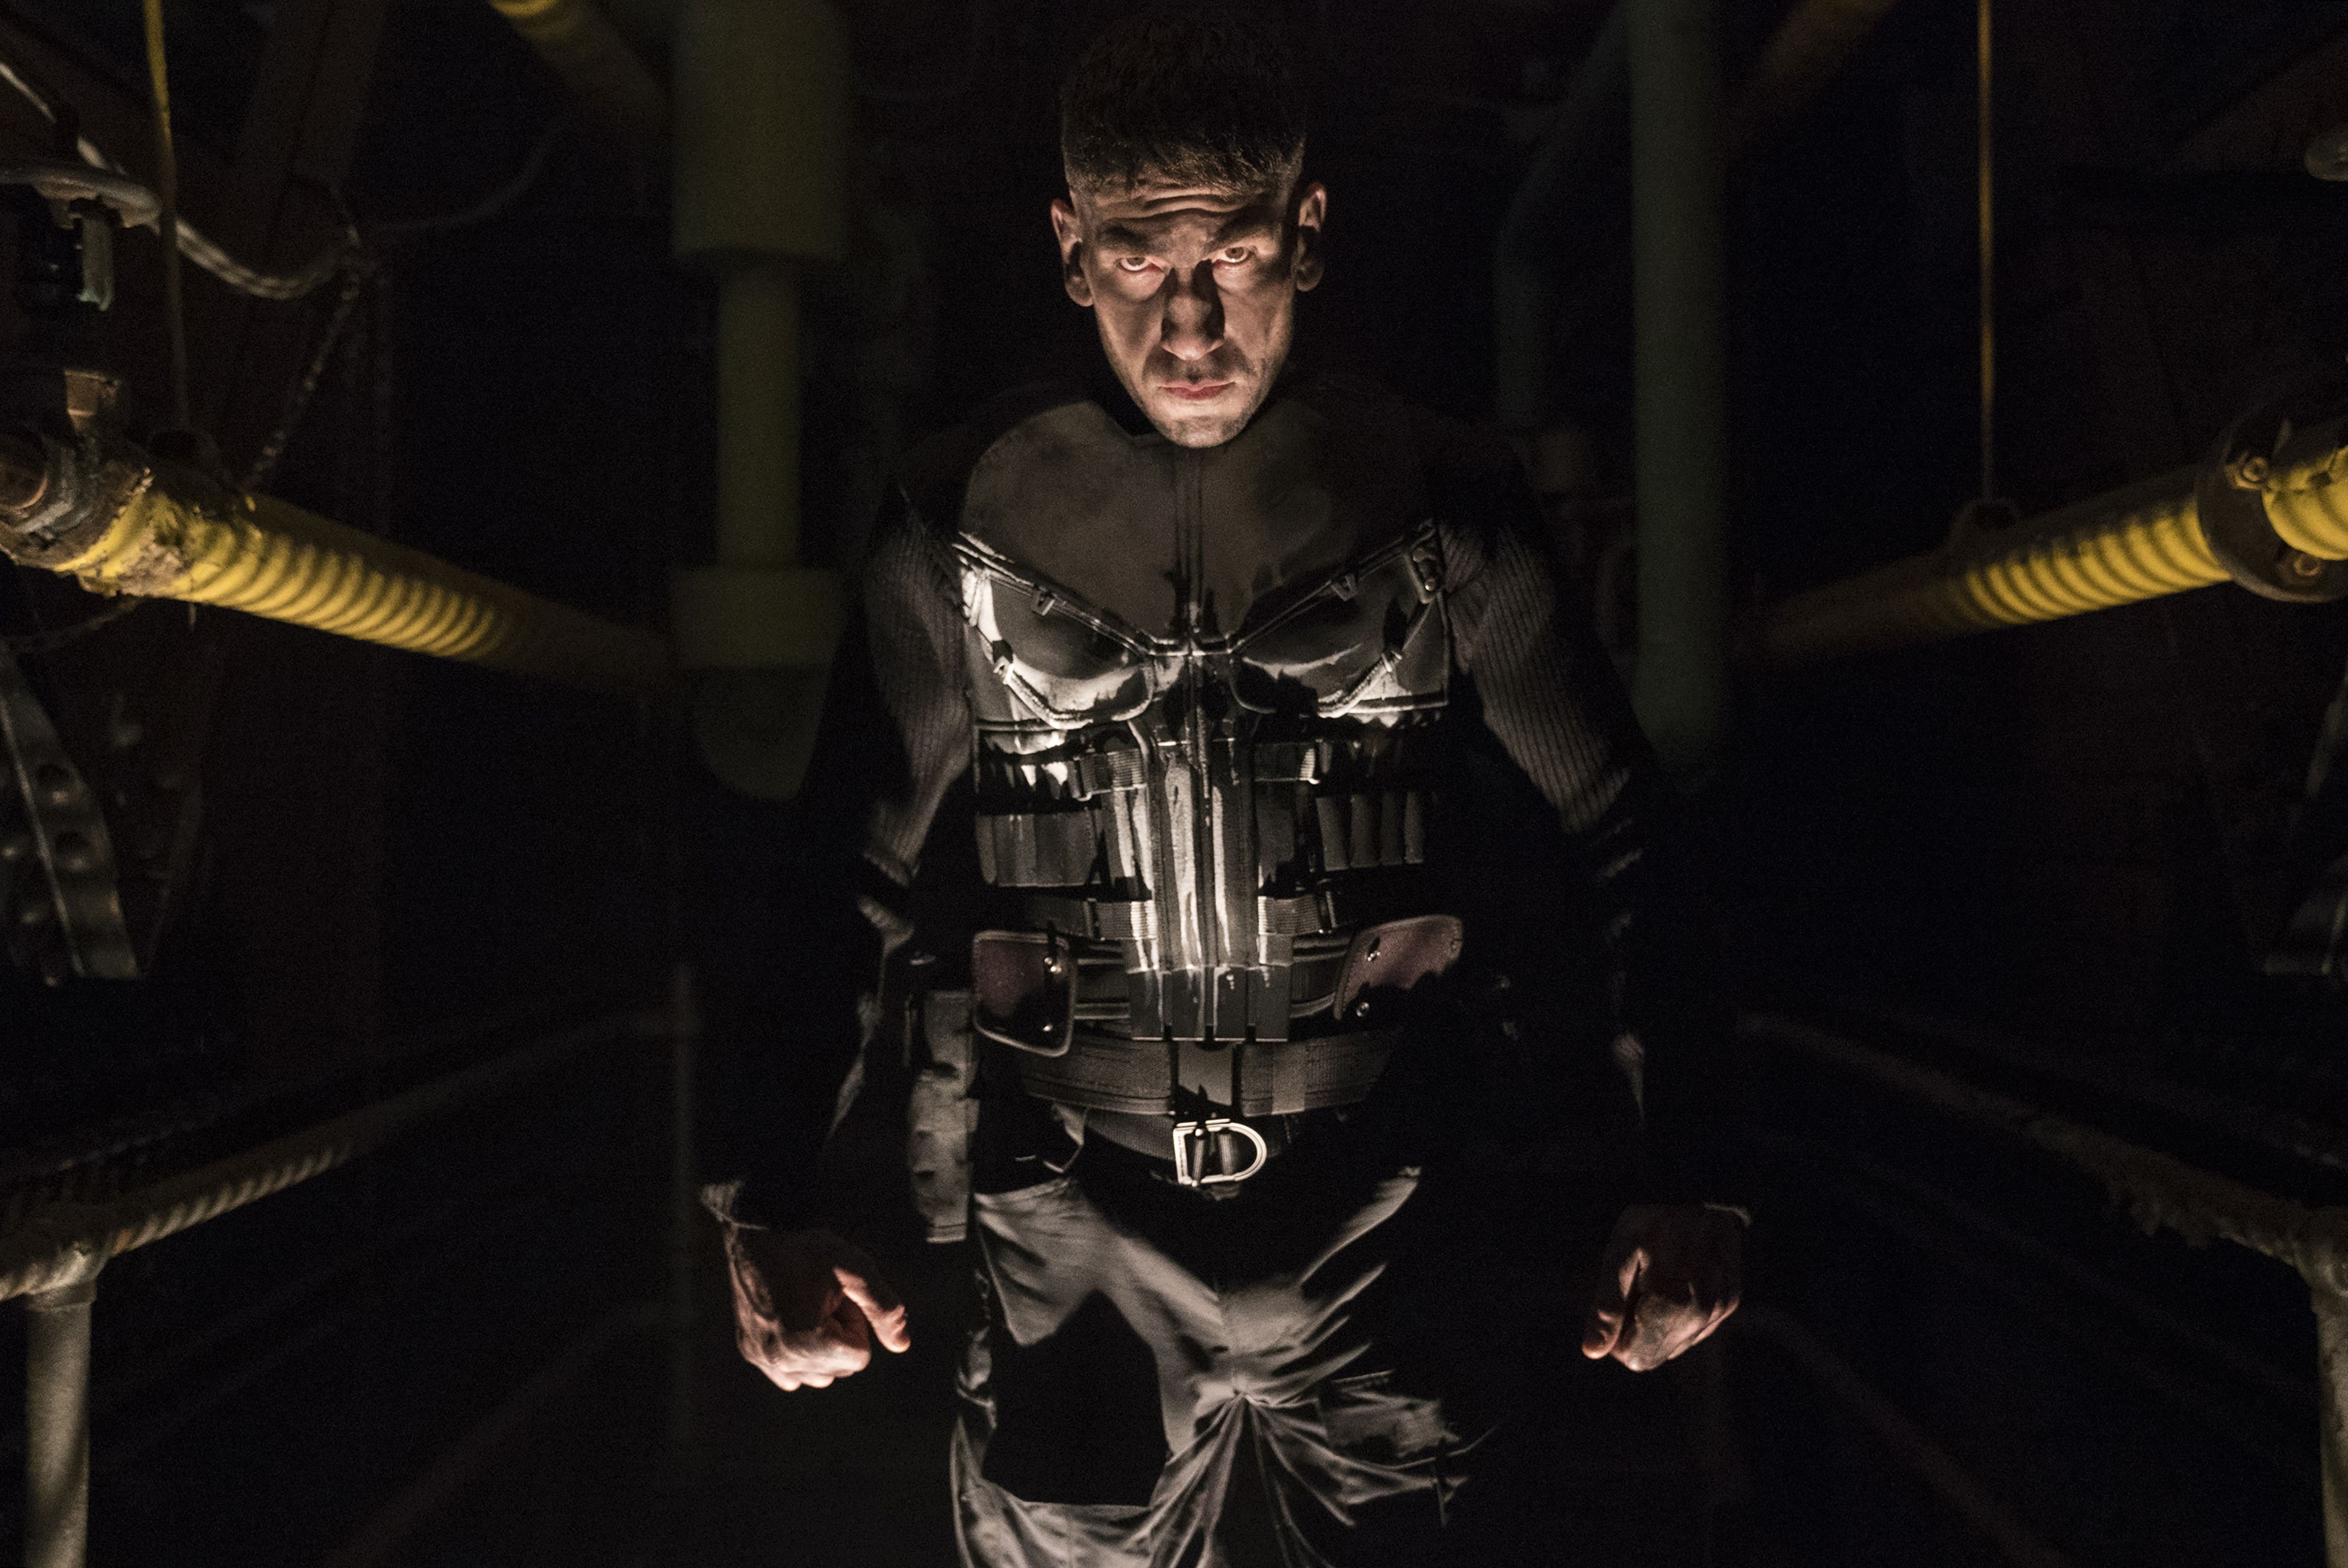 Netflix is bringing The Punisher back for a second season